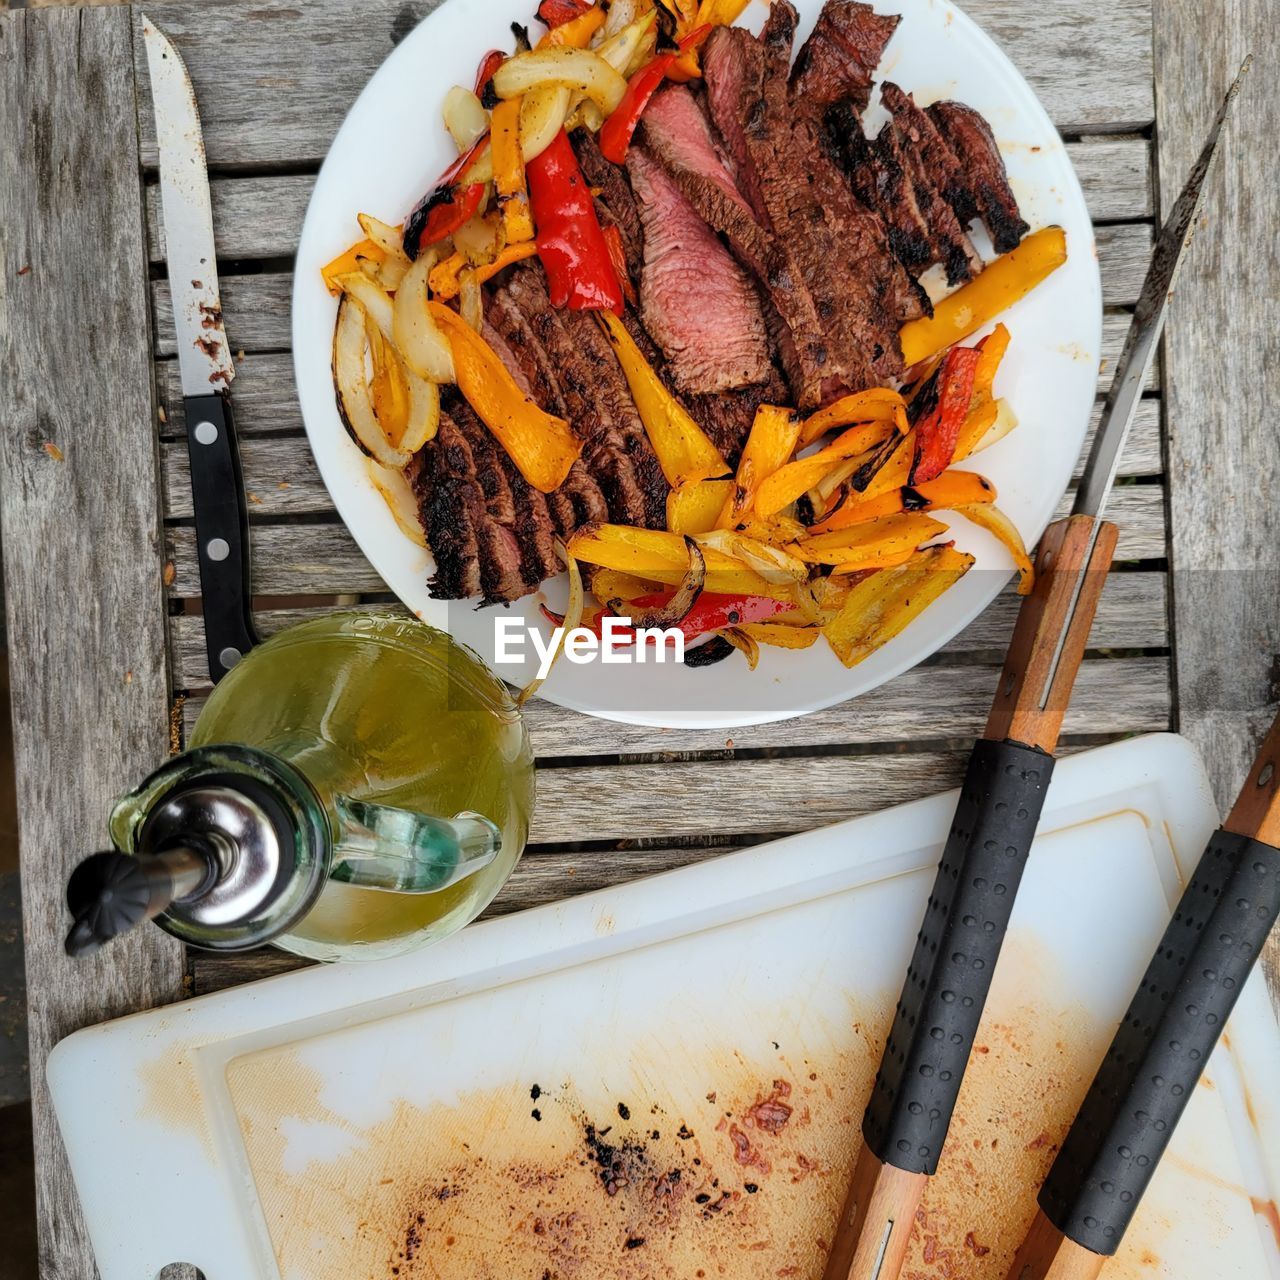 food and drink, food, wood, freshness, high angle view, vegetable, table, plate, dish, fork, meal, meat, eating utensil, fast food, healthy eating, no people, directly above, kitchen utensil, still life, indoors, wellbeing, knife, table knife, household equipment, kitchen knife, carrot, produce